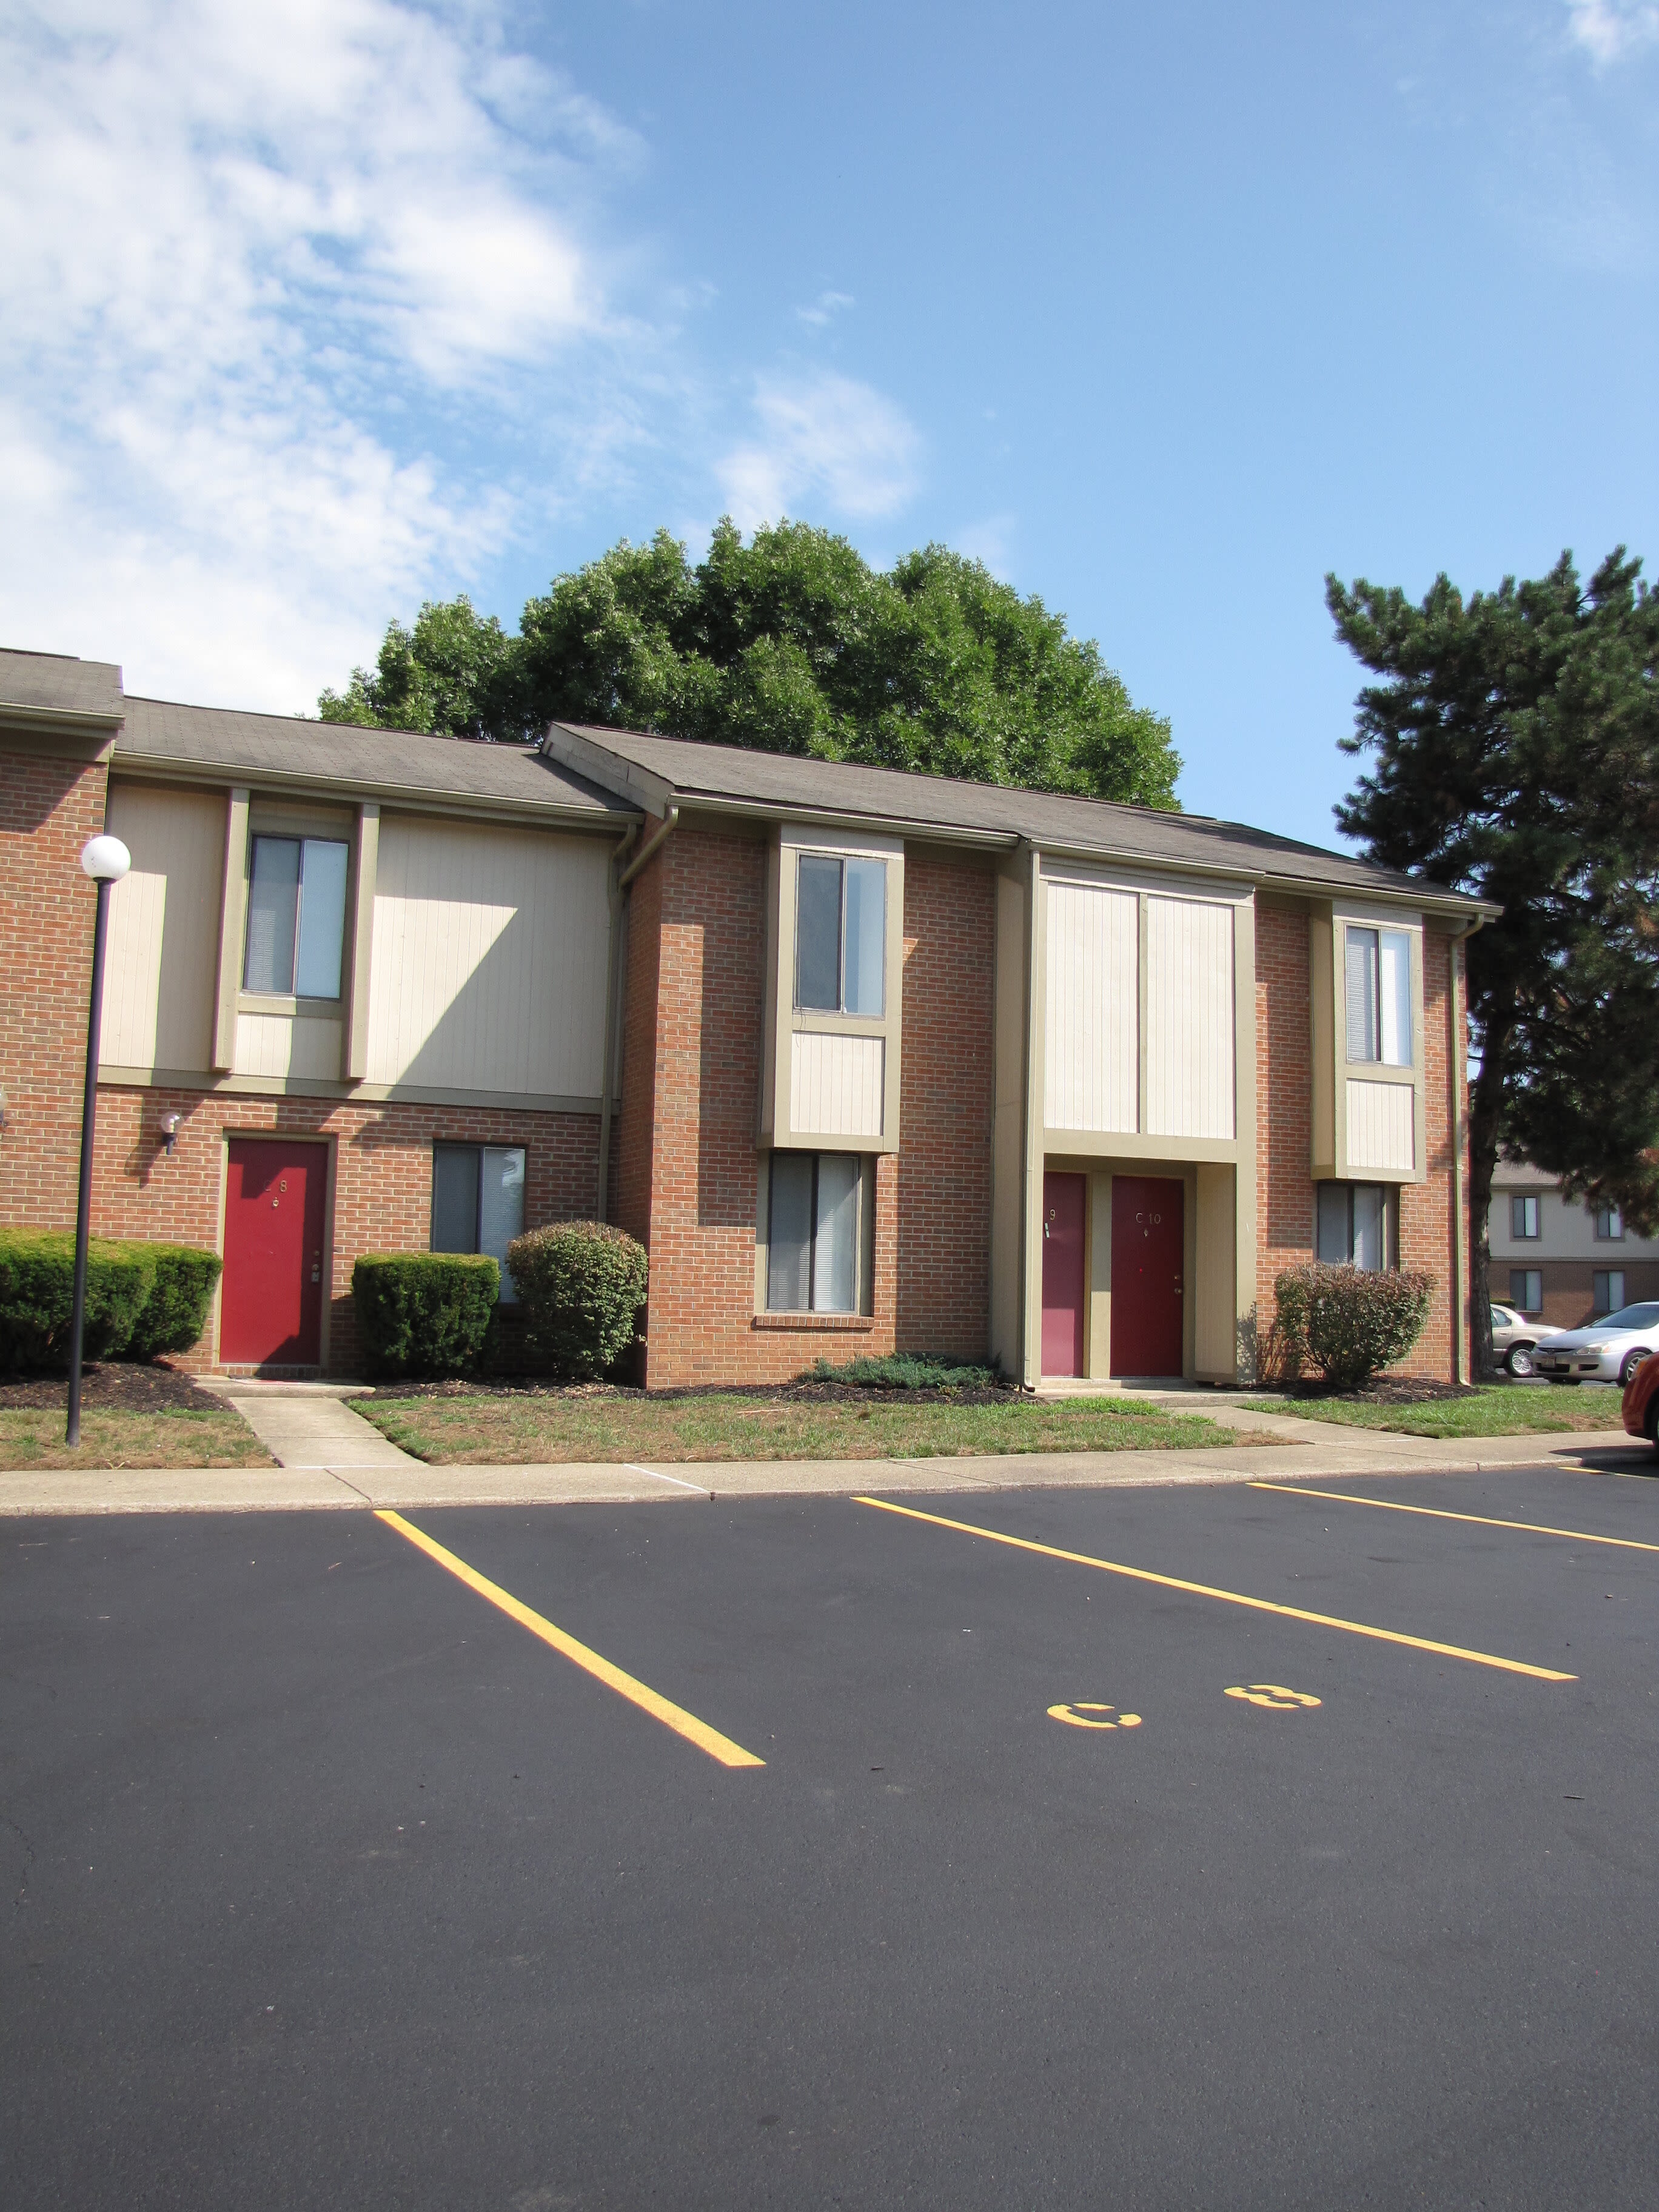 Exterior view of the apartments  and parking at North River Place in Chillicothe, Ohio